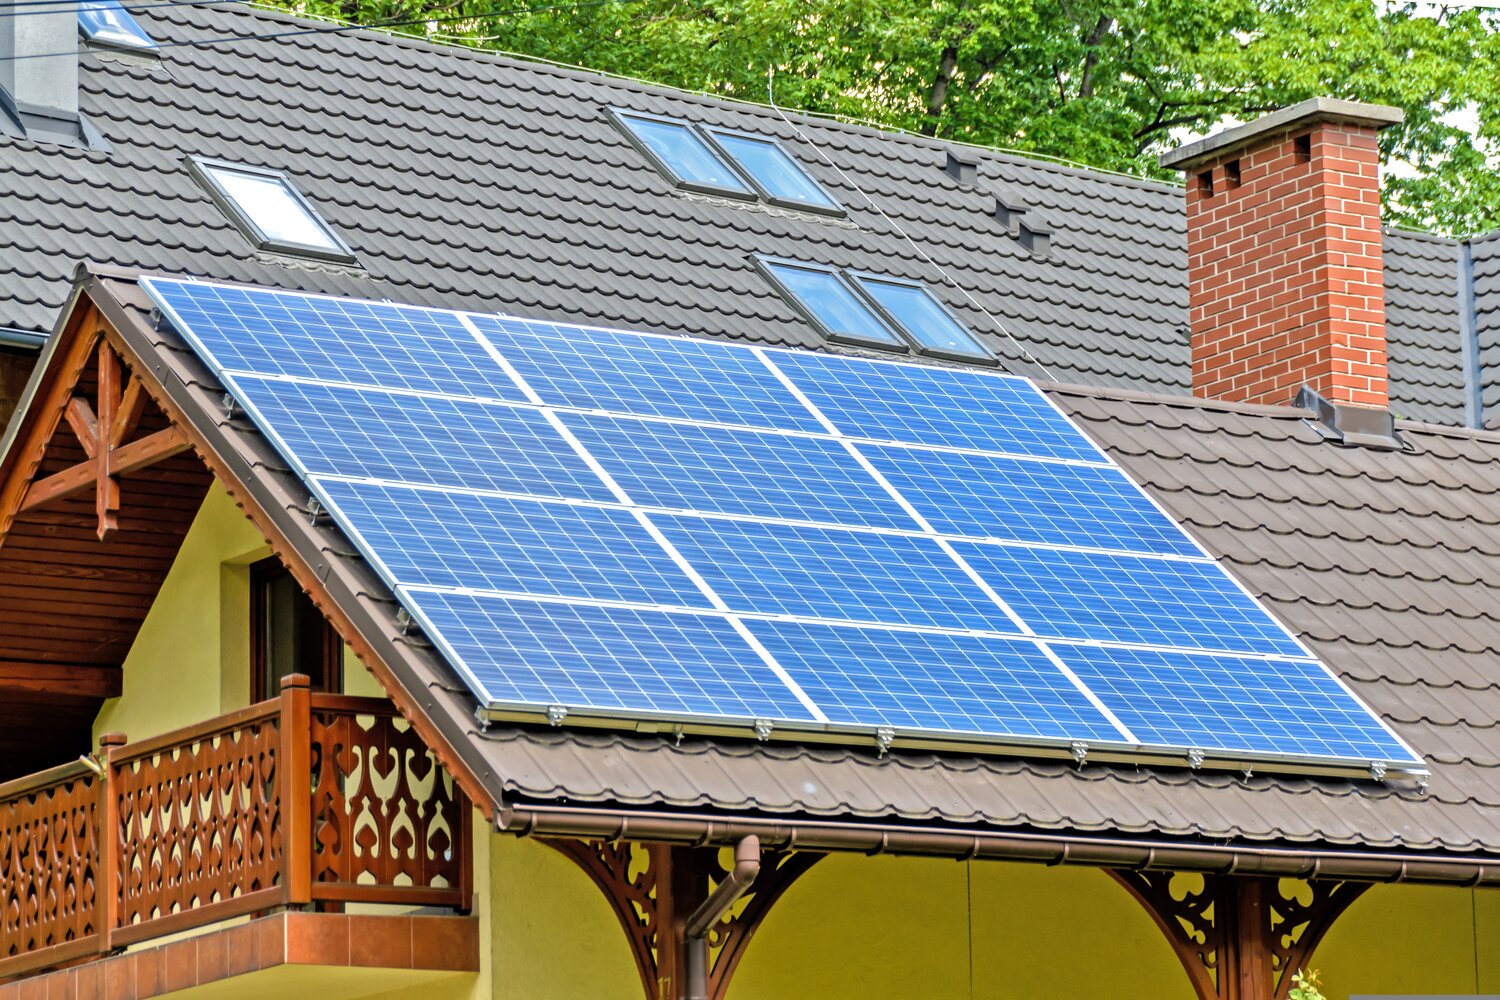 Using solar power instead of conventional forms of energy reduces the amount of carbon and other pollutants emitted, resulting in cleaner air and water.